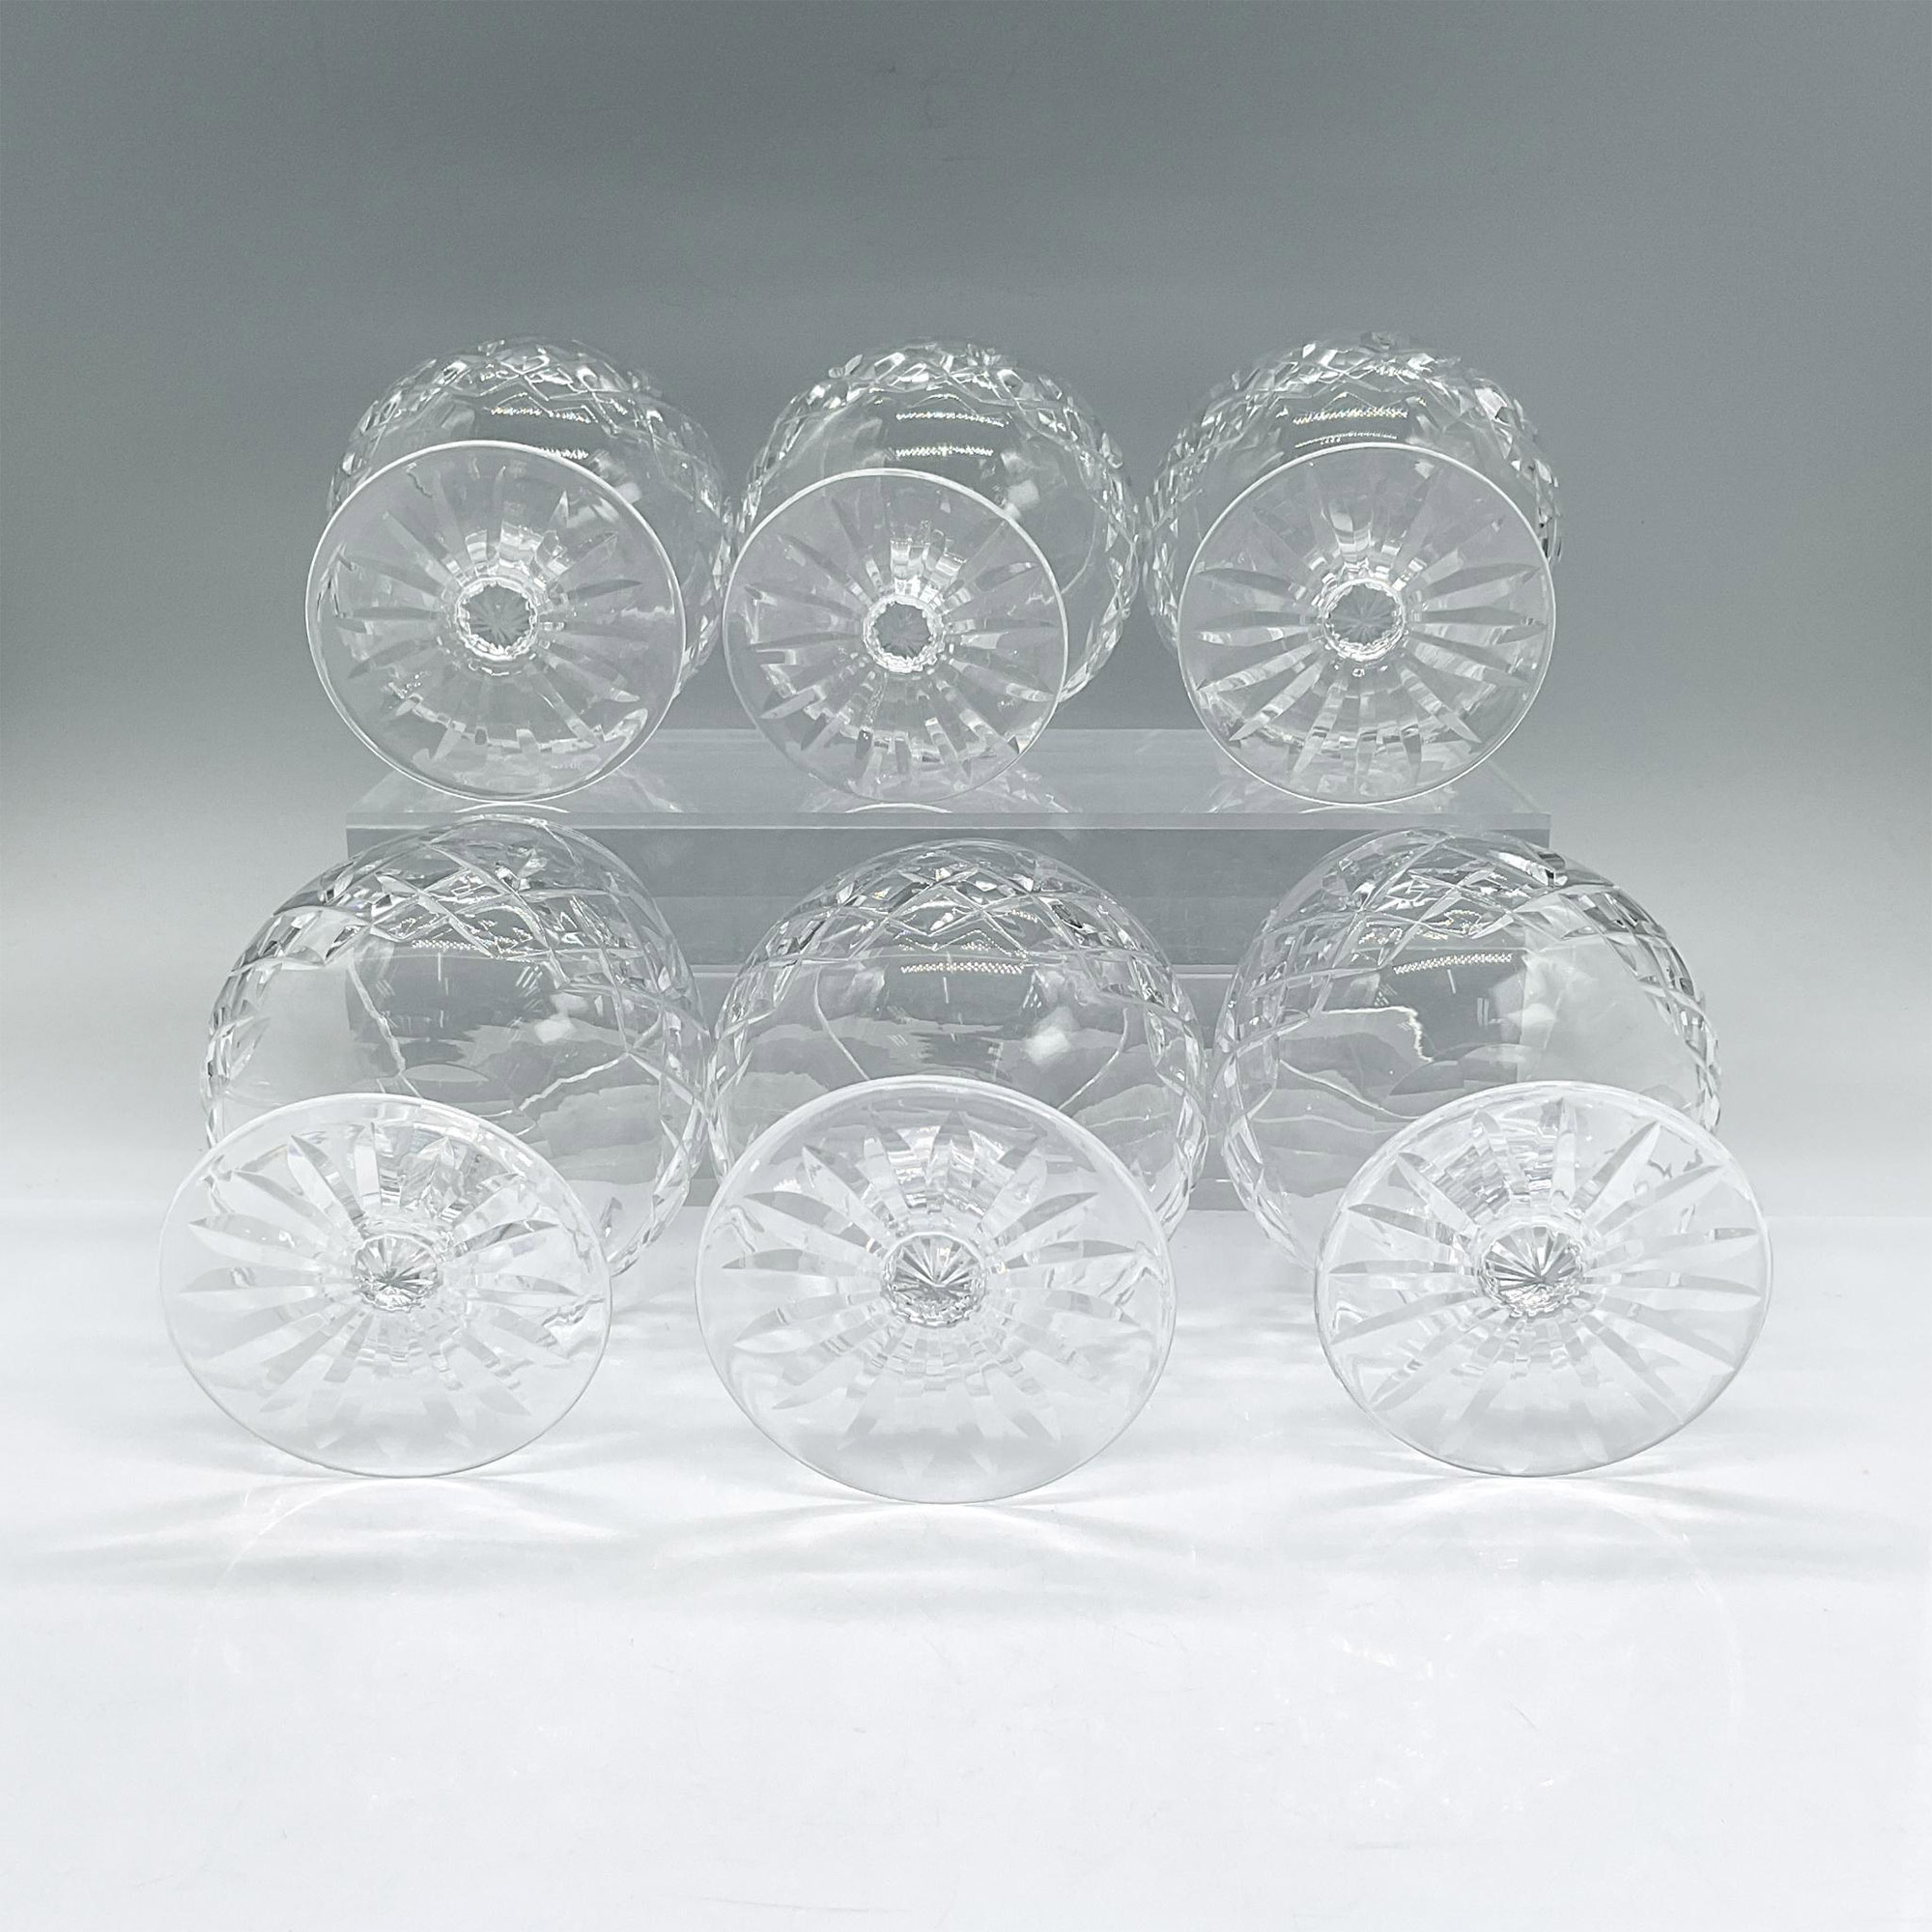 6pc Waterford Crystal Brandy Glasses, Lismore - Image 3 of 3